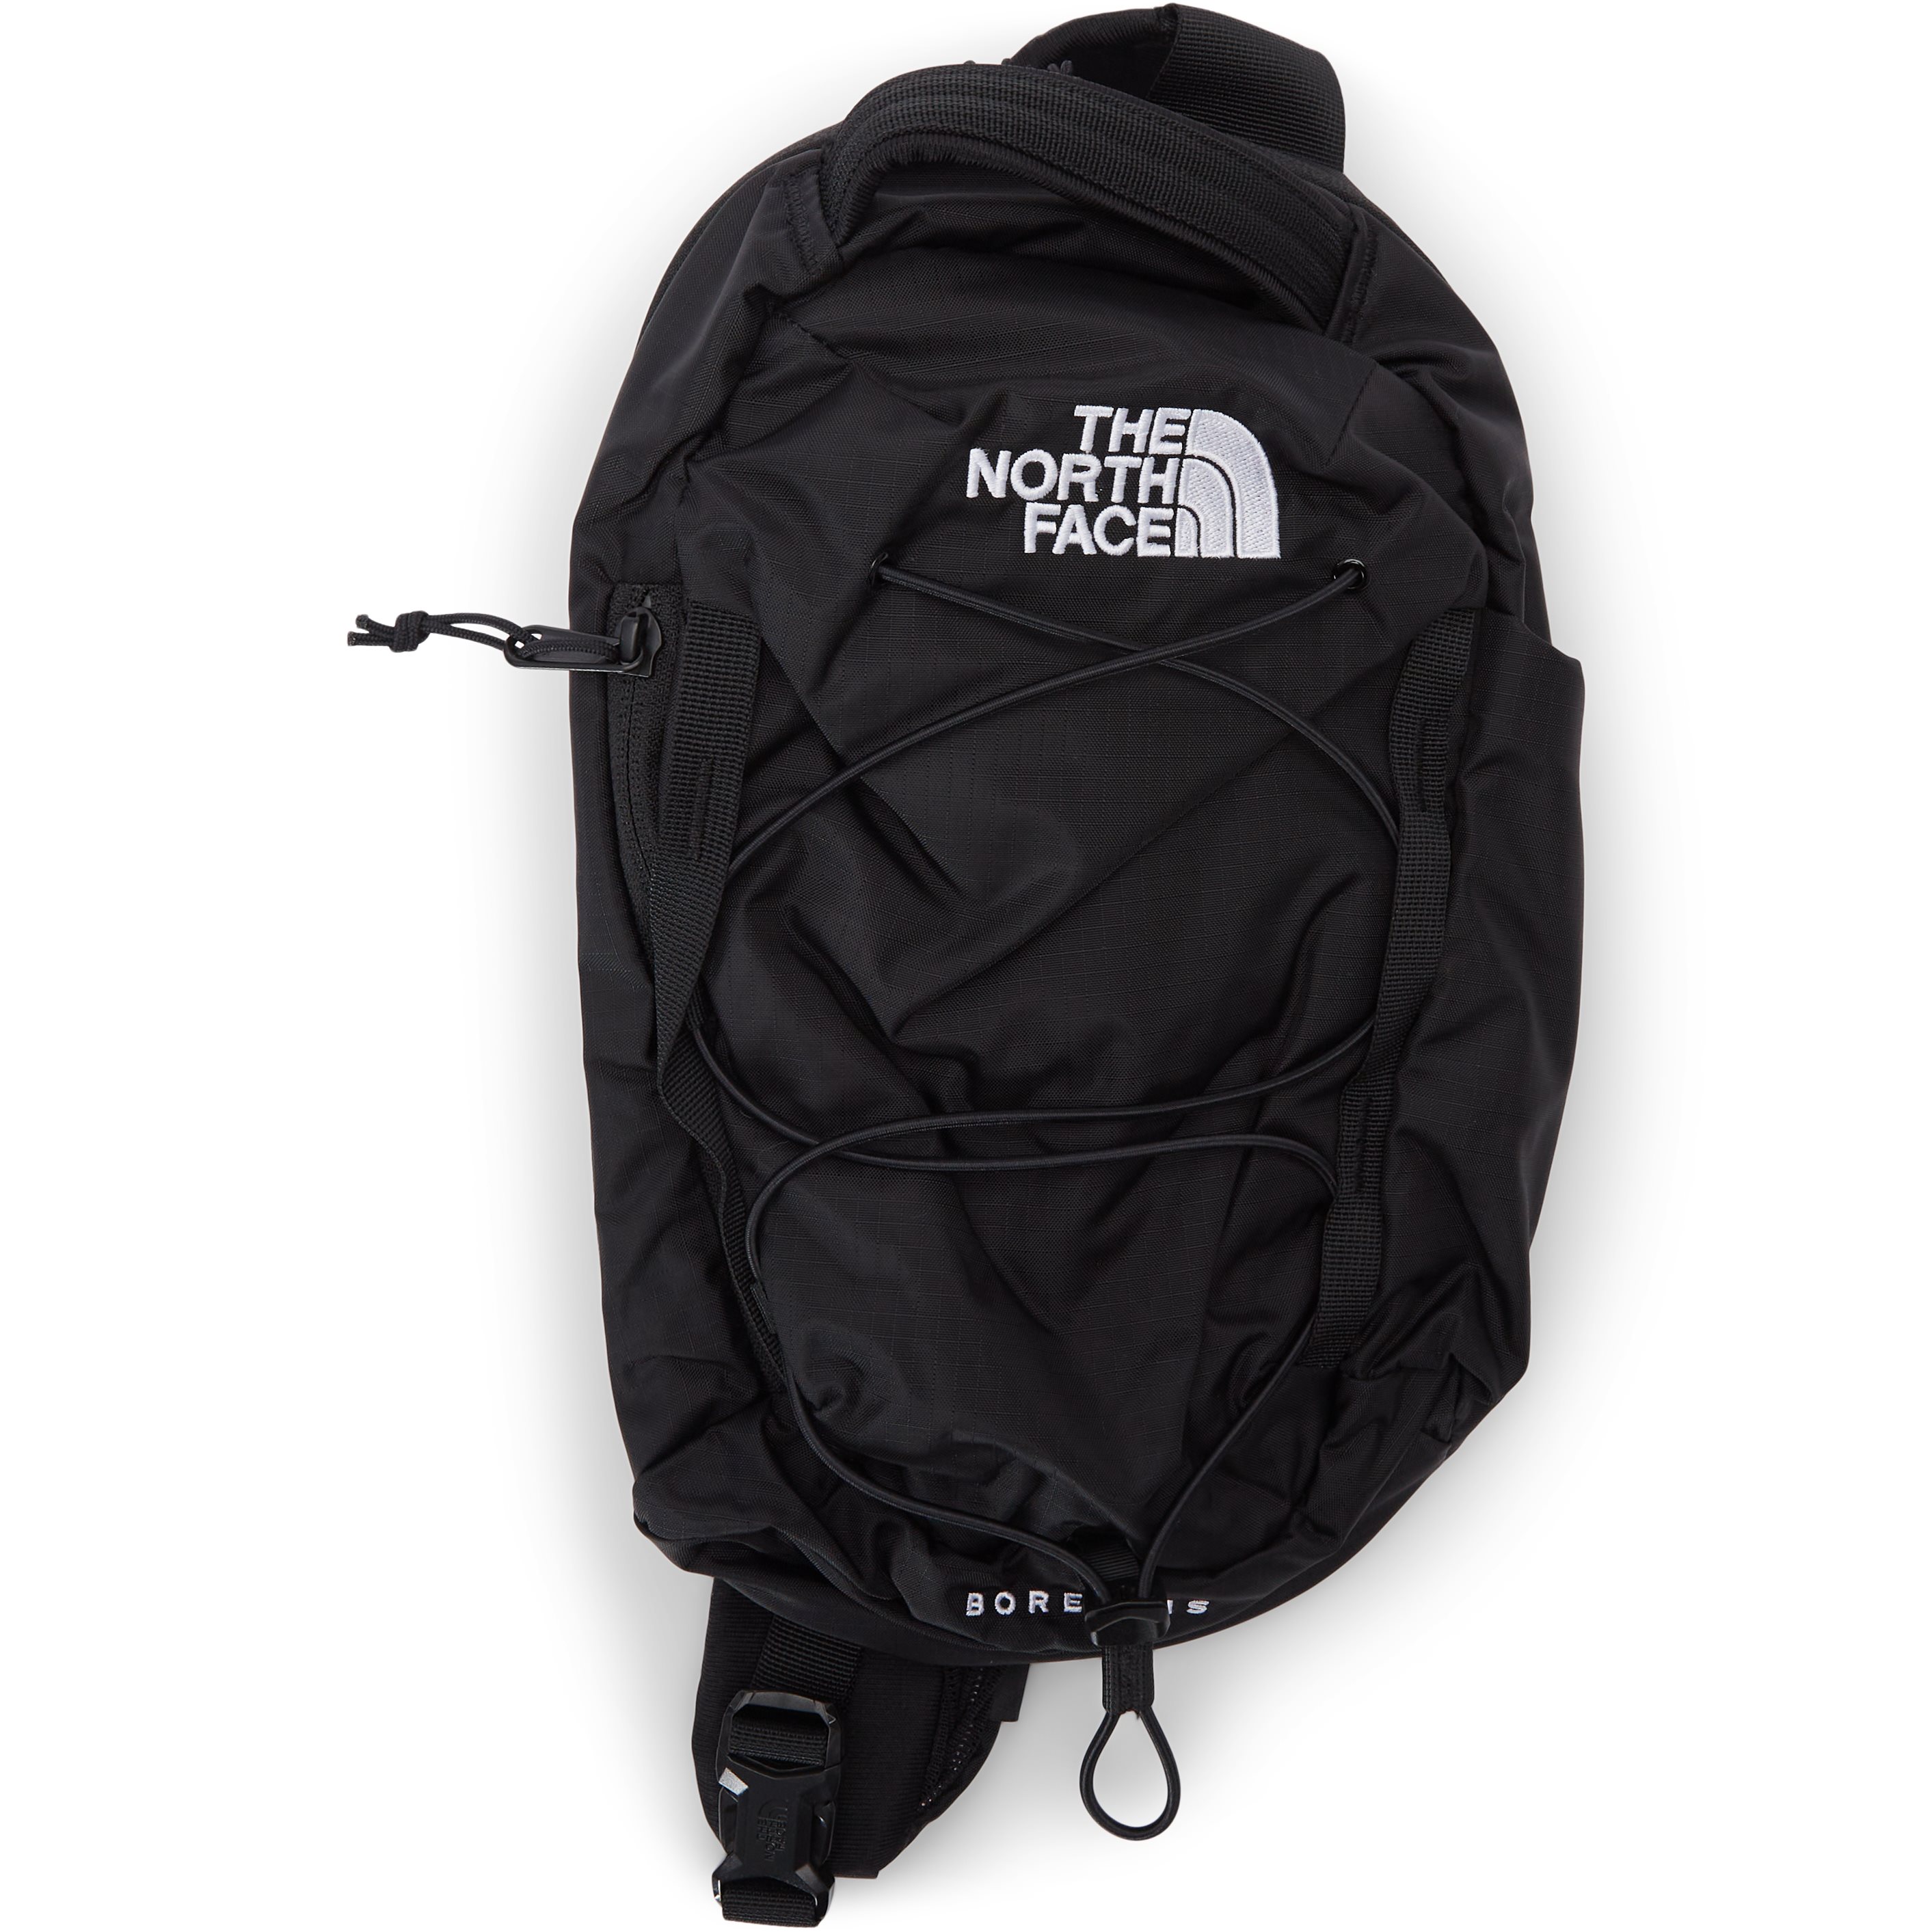 The North Face Bags BOREALIS SLING NF0A52UP Black